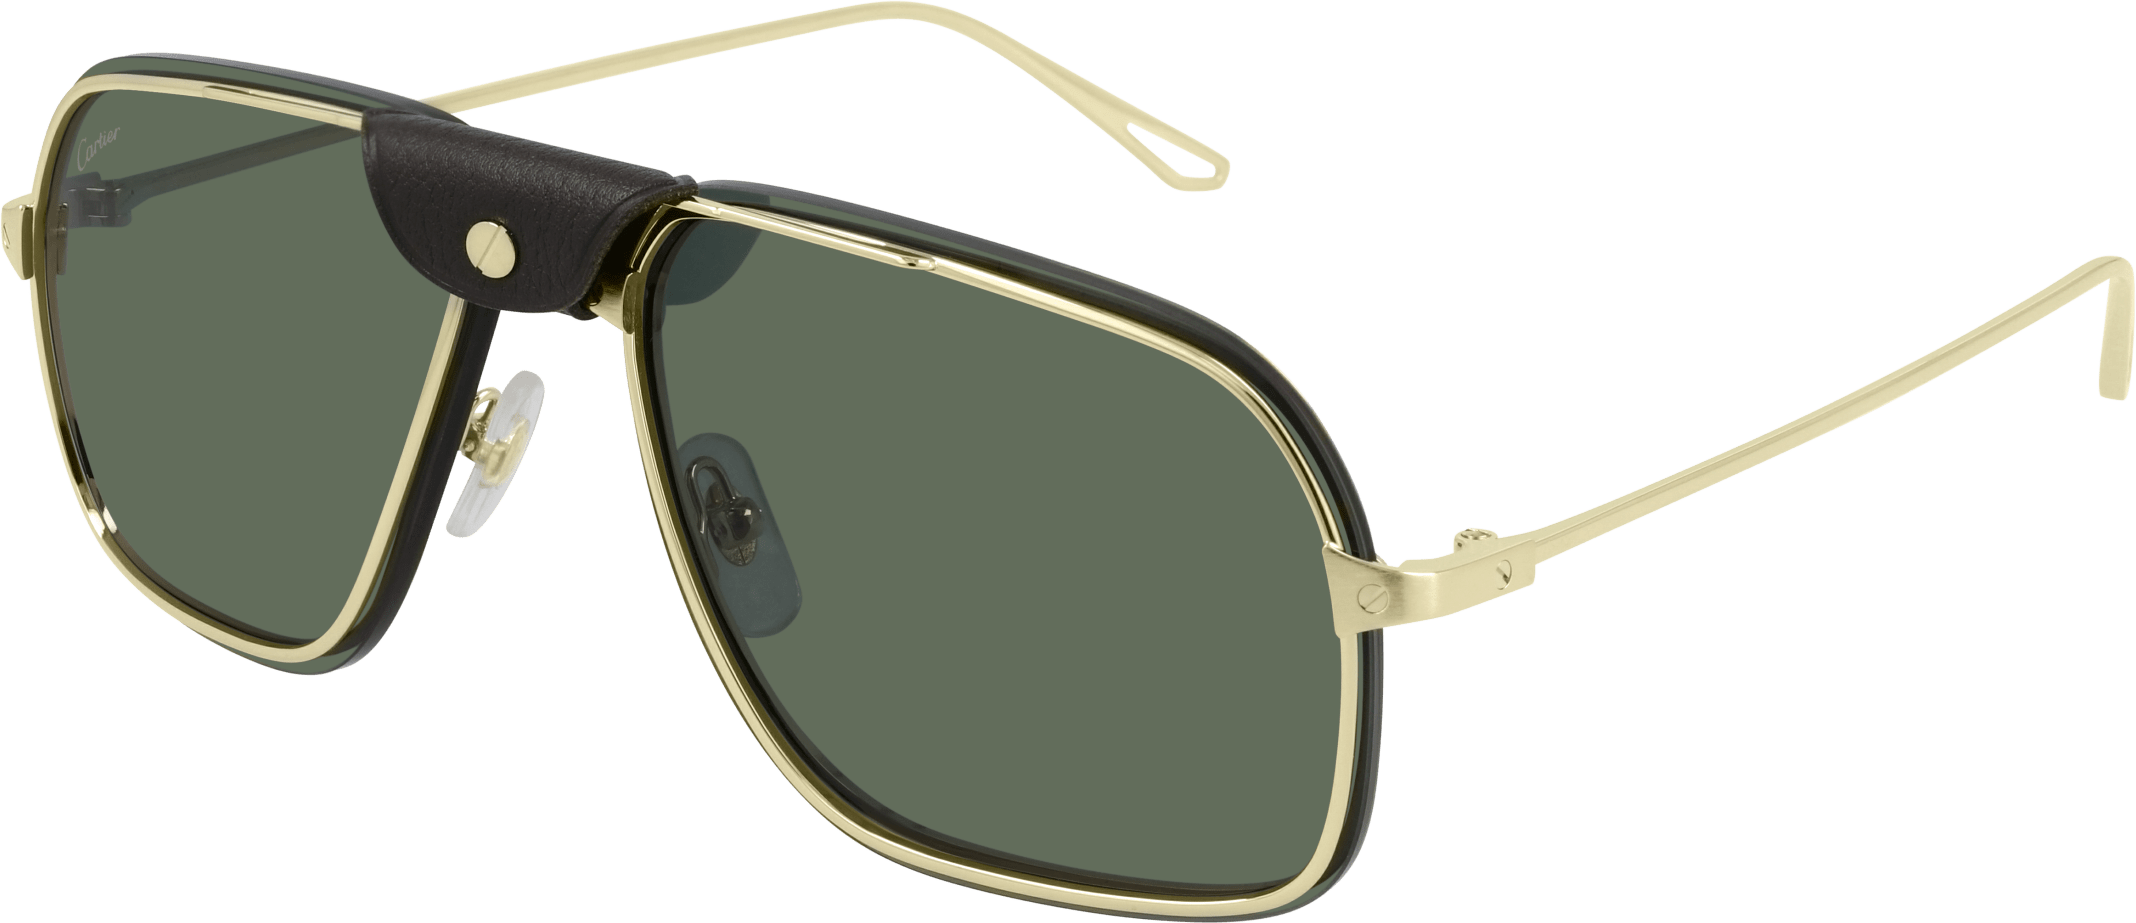 Color_CT0243S-002 - GOLD - GREEN - AR (ANTI REFLECTIVE) - POLARIZED